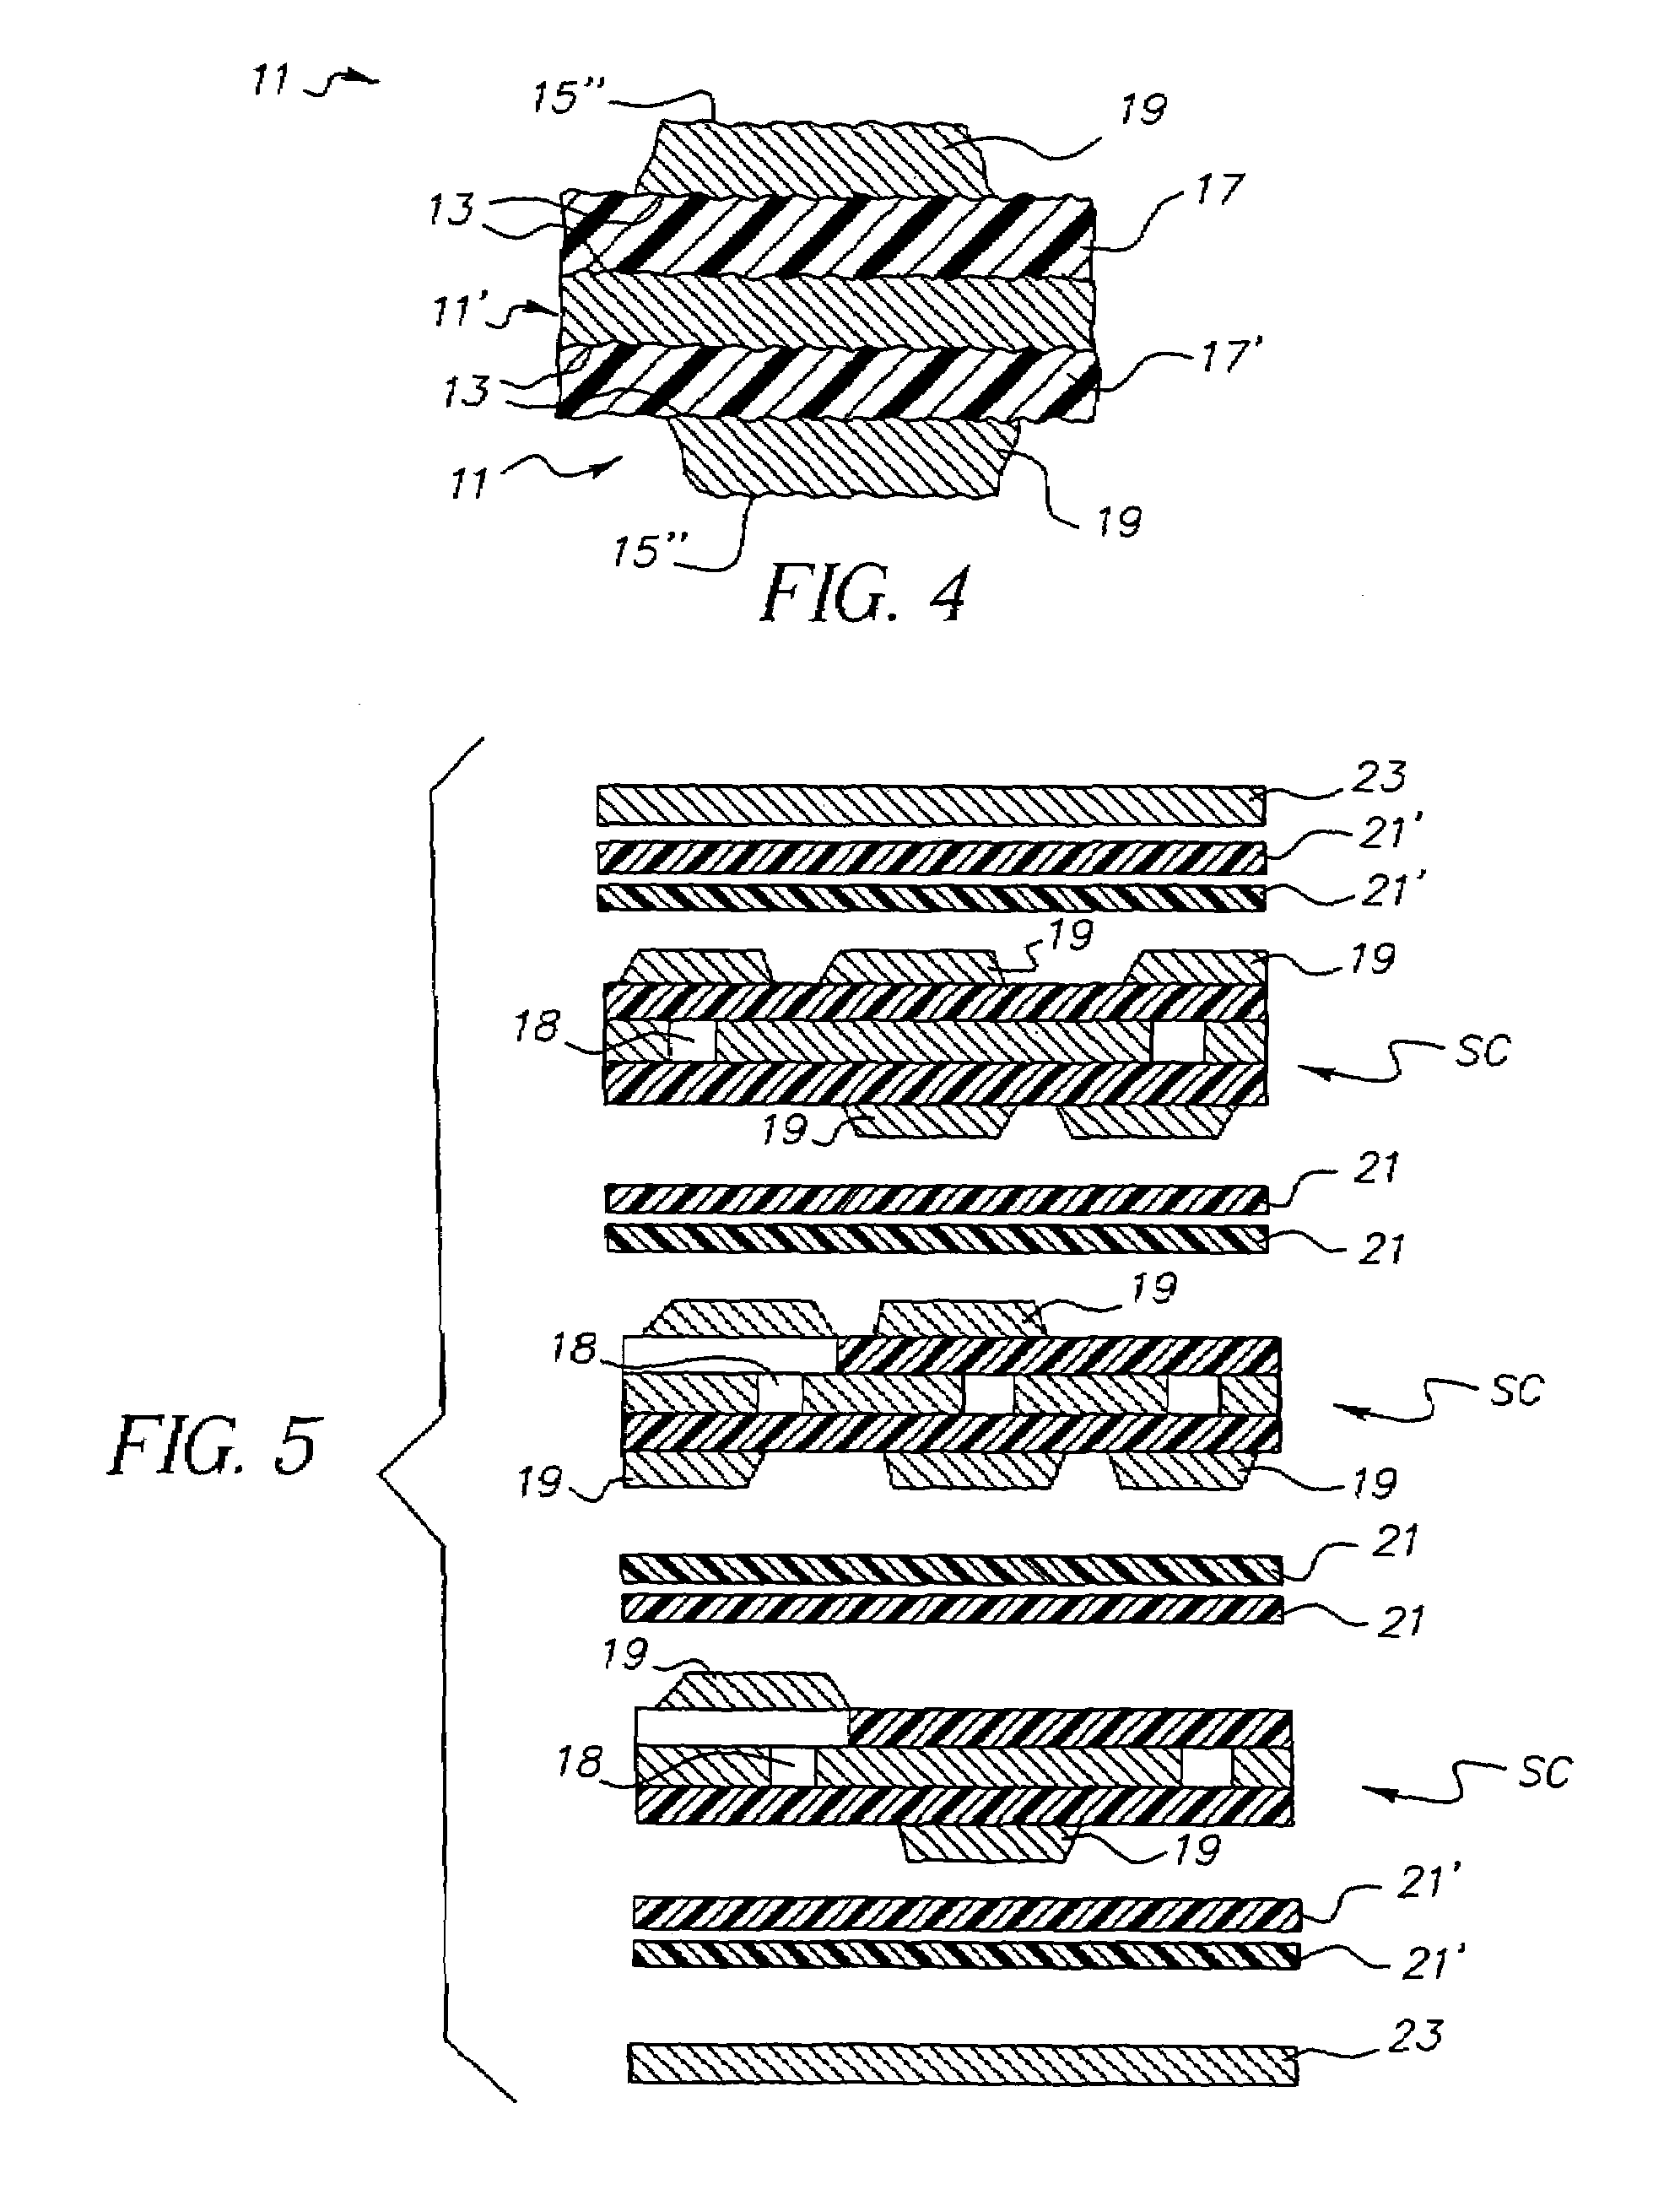 Circuitized substrates utilizing three smooth-sided conductive layers as part thereof, method of making same, and electrical assemblies and information handling systems utilizing same